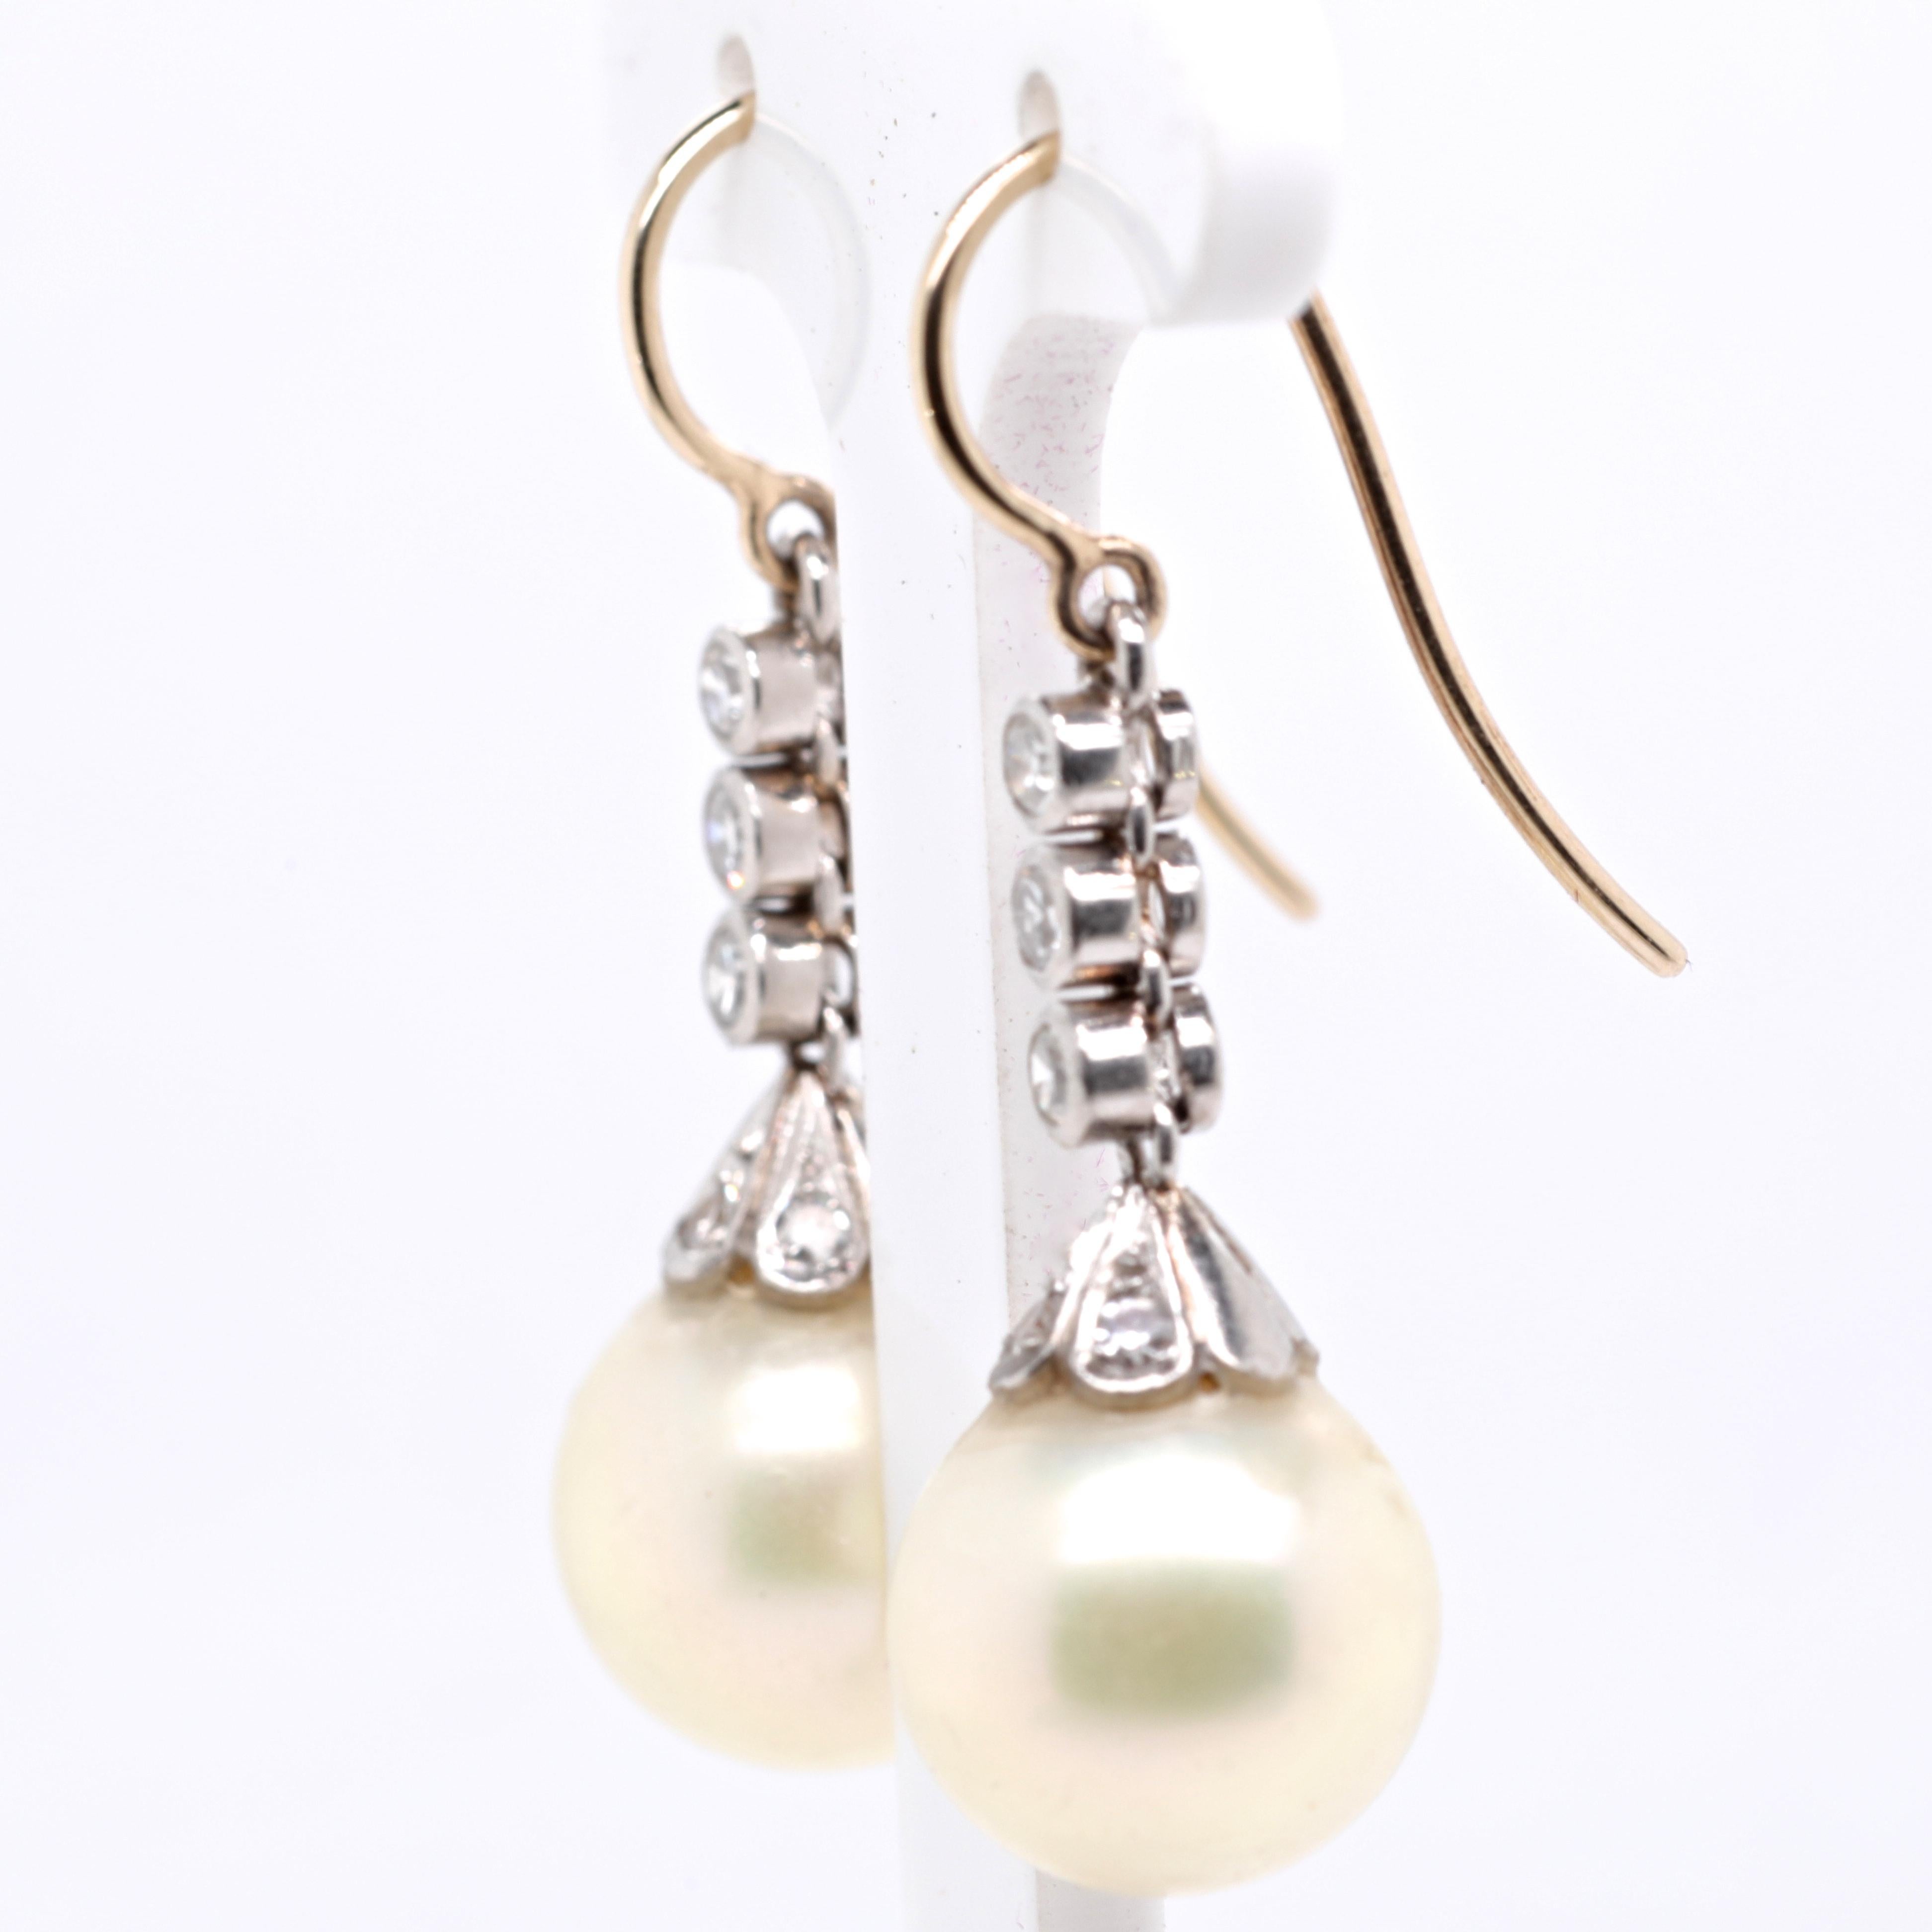 You'll love wearing these. You can be elegant or dressed down and today pearls are actively used in fashion as a unique, chic and elegant accent. Add some Antique Diamond Cultured Pearl 18k White Gold Drop Earrings to your jewelry collection!